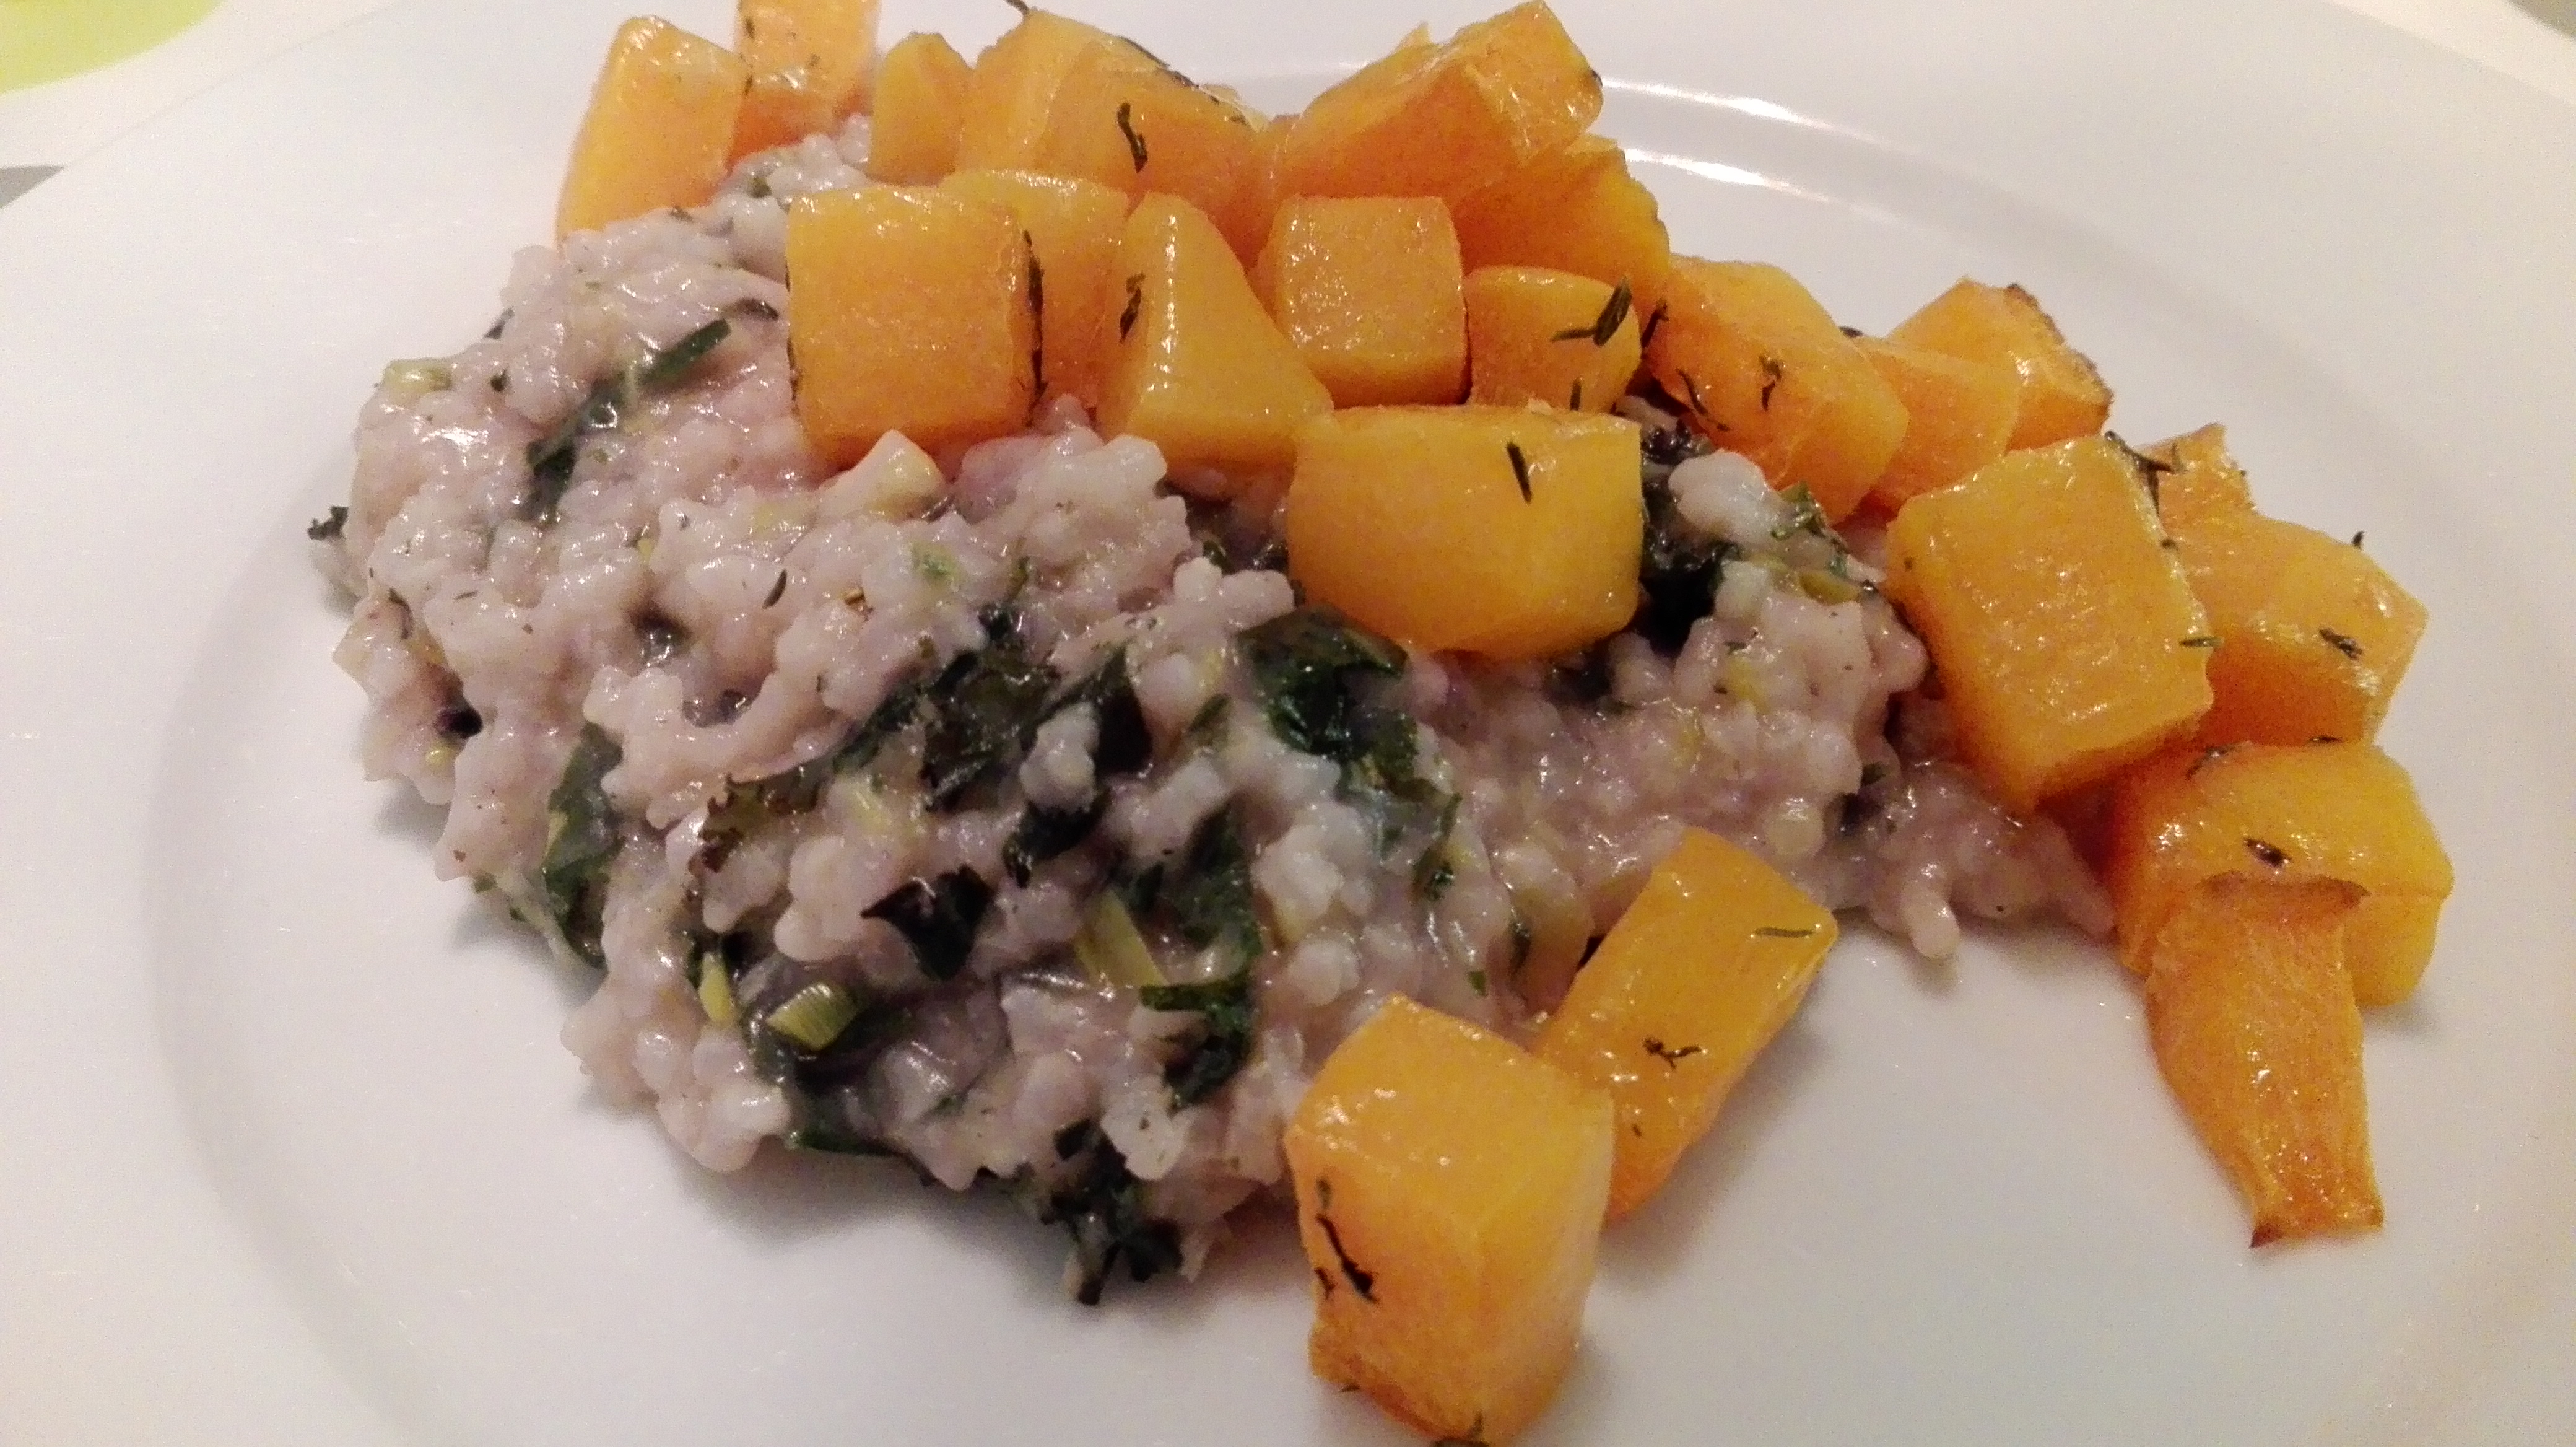 Low Histamine Risotto with Butternut Squash - ready to be eaten o/ YUM!